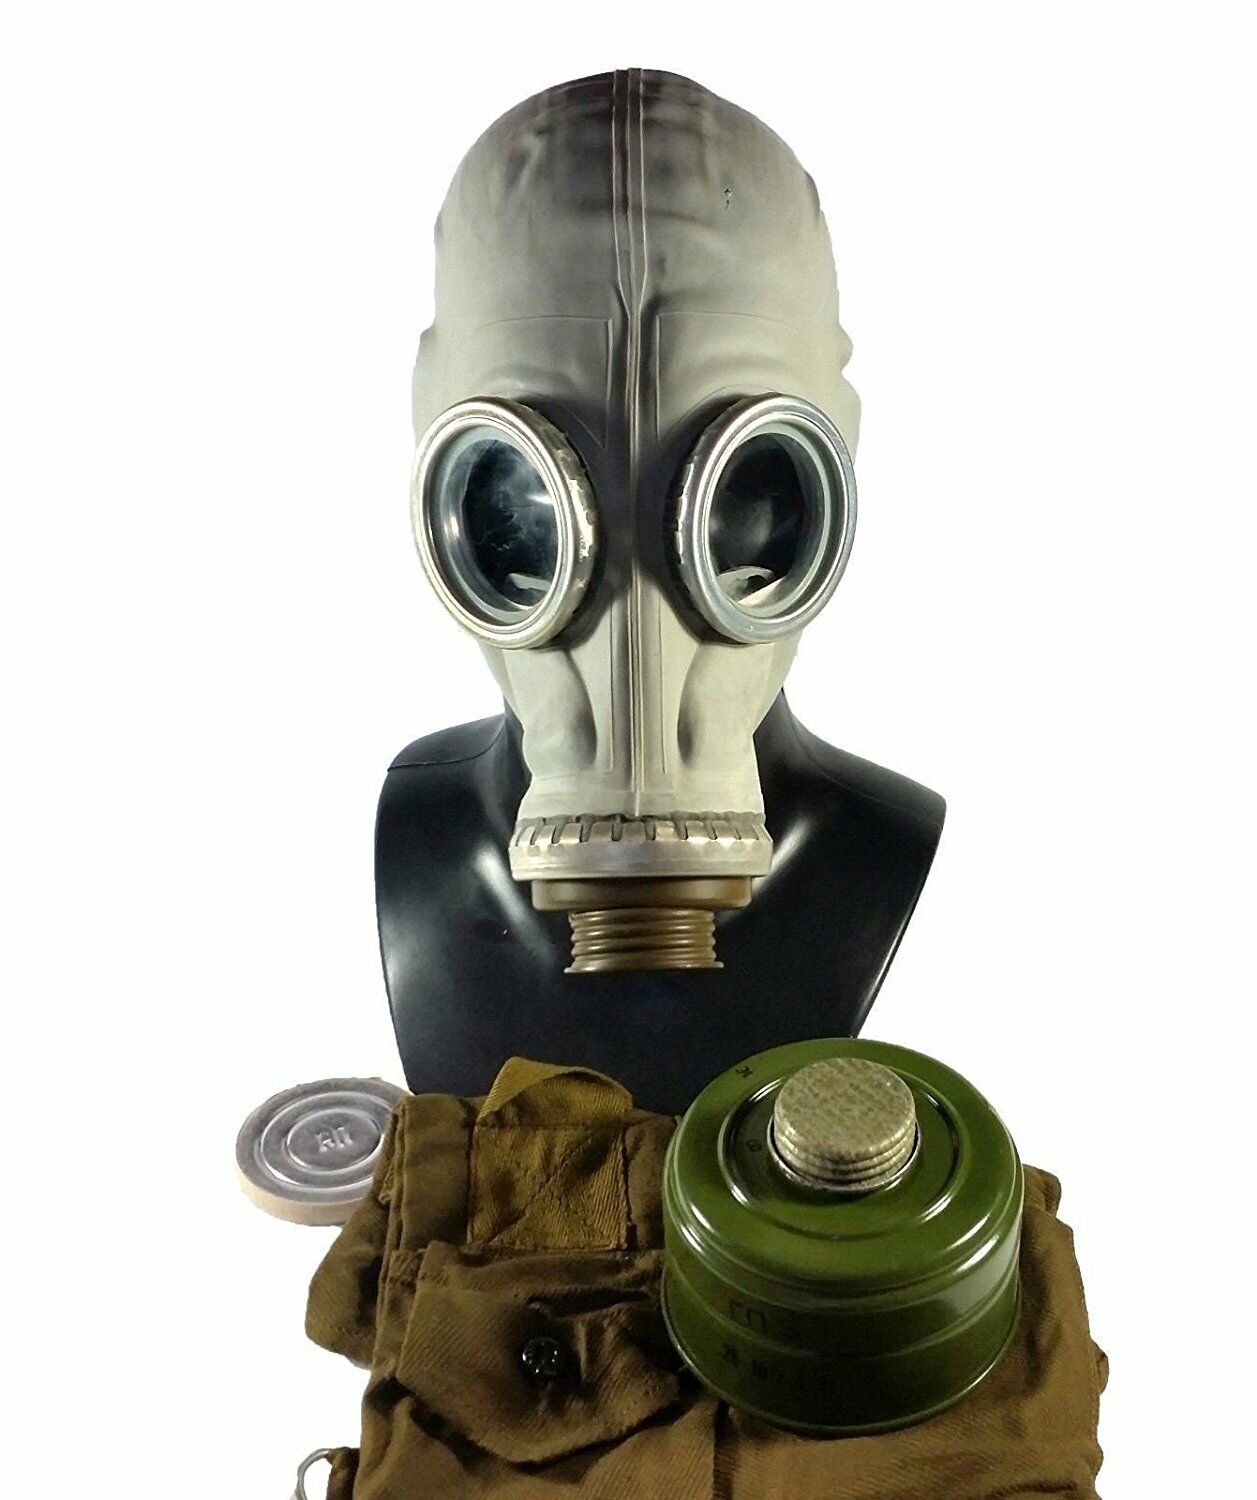 Soviet Russian Military Gas Mask Gp-5. Grey Rubber Full Set. Rare Size - Large